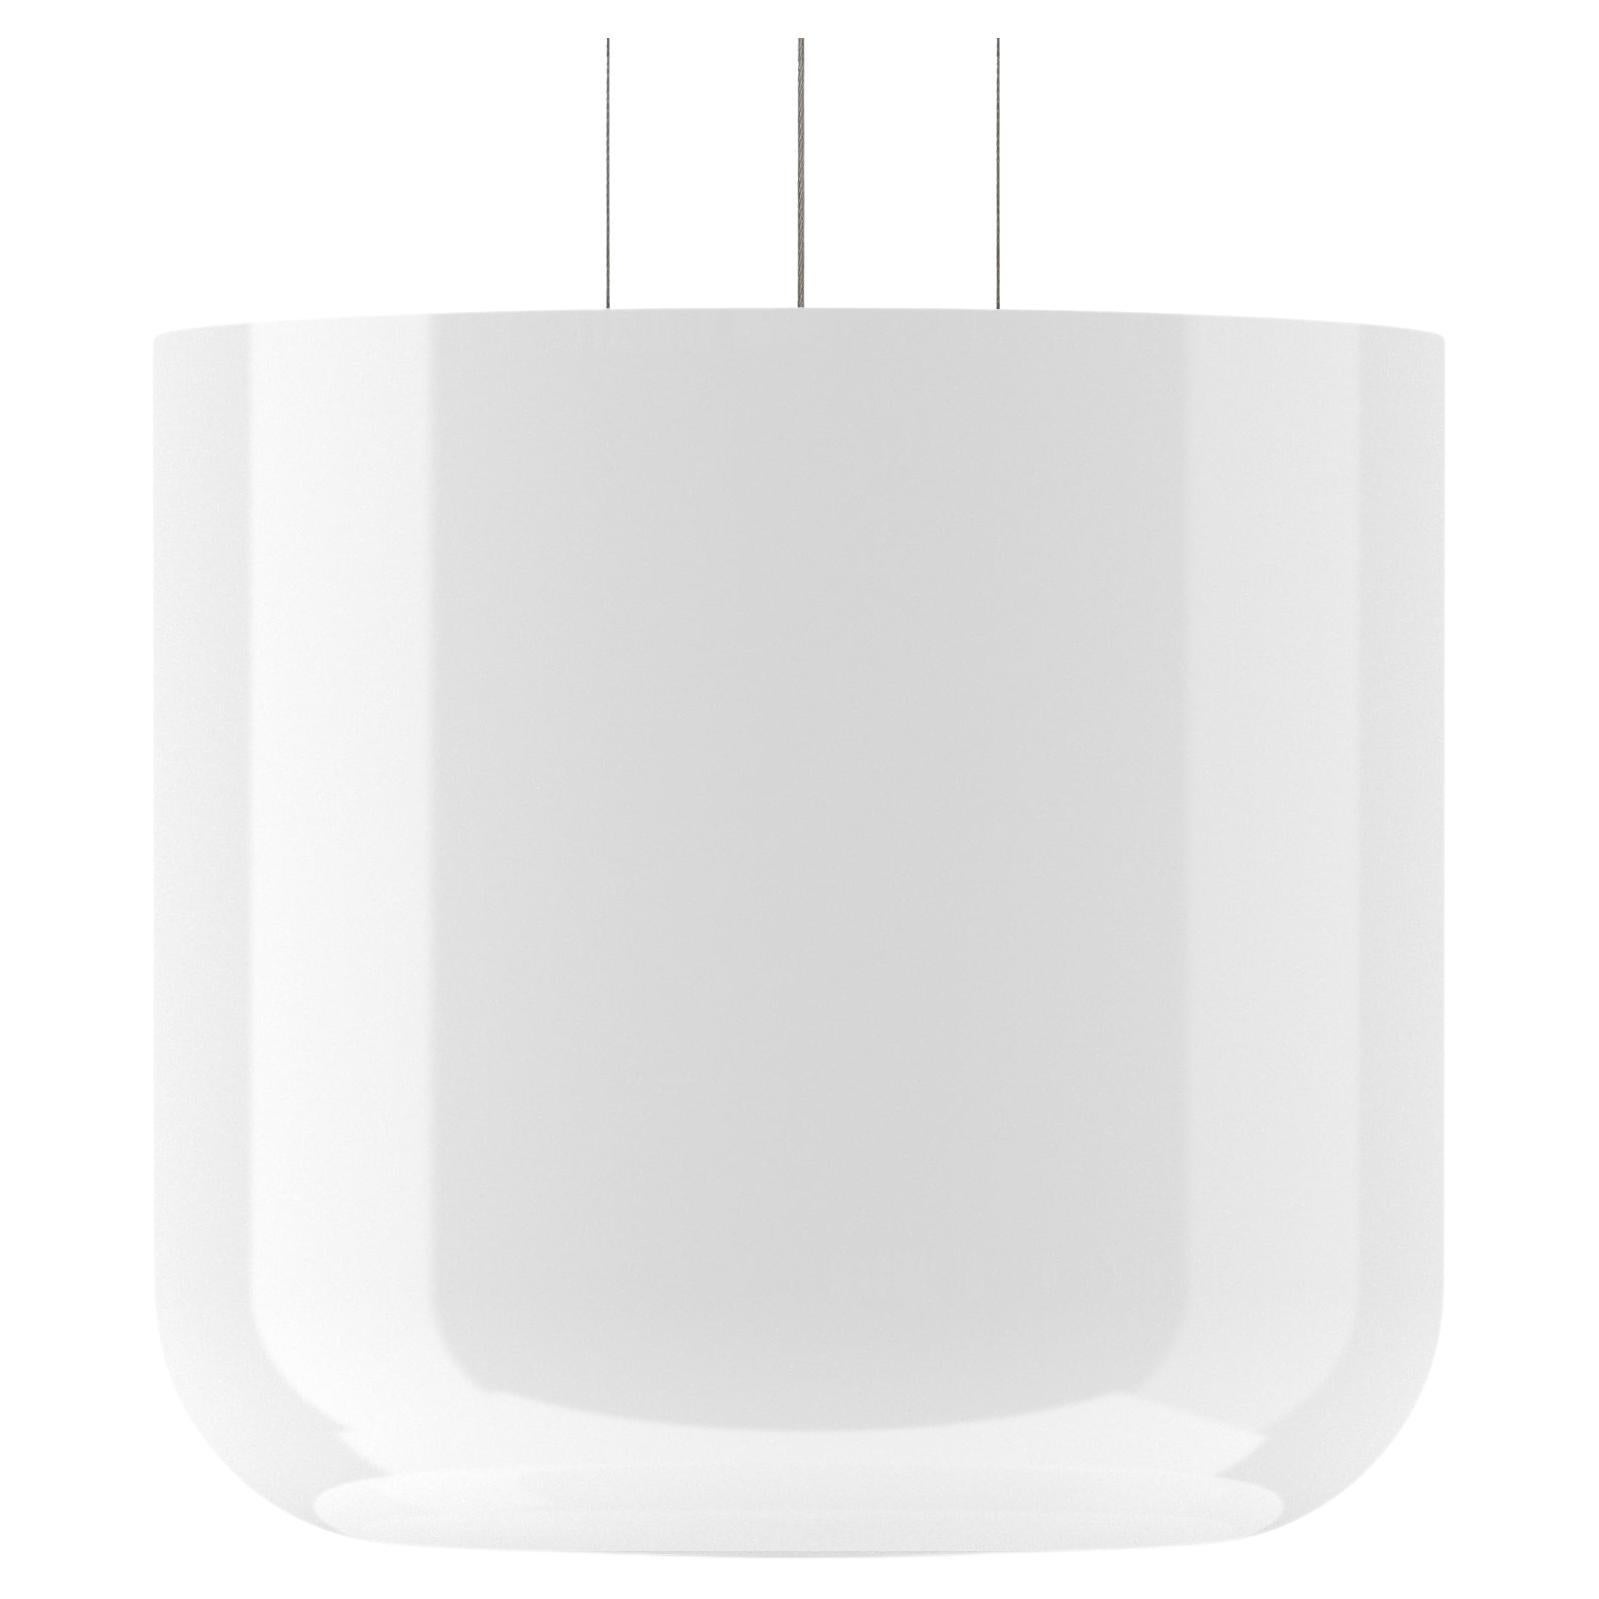 Totem is a versatile pendant lighting collection comprised
of exquisitely blown opal glass shades designed around
a modular platform. Totem’s soft, pure white geometric
forms provide a charming interplay of unique combinations
to provide warmth and